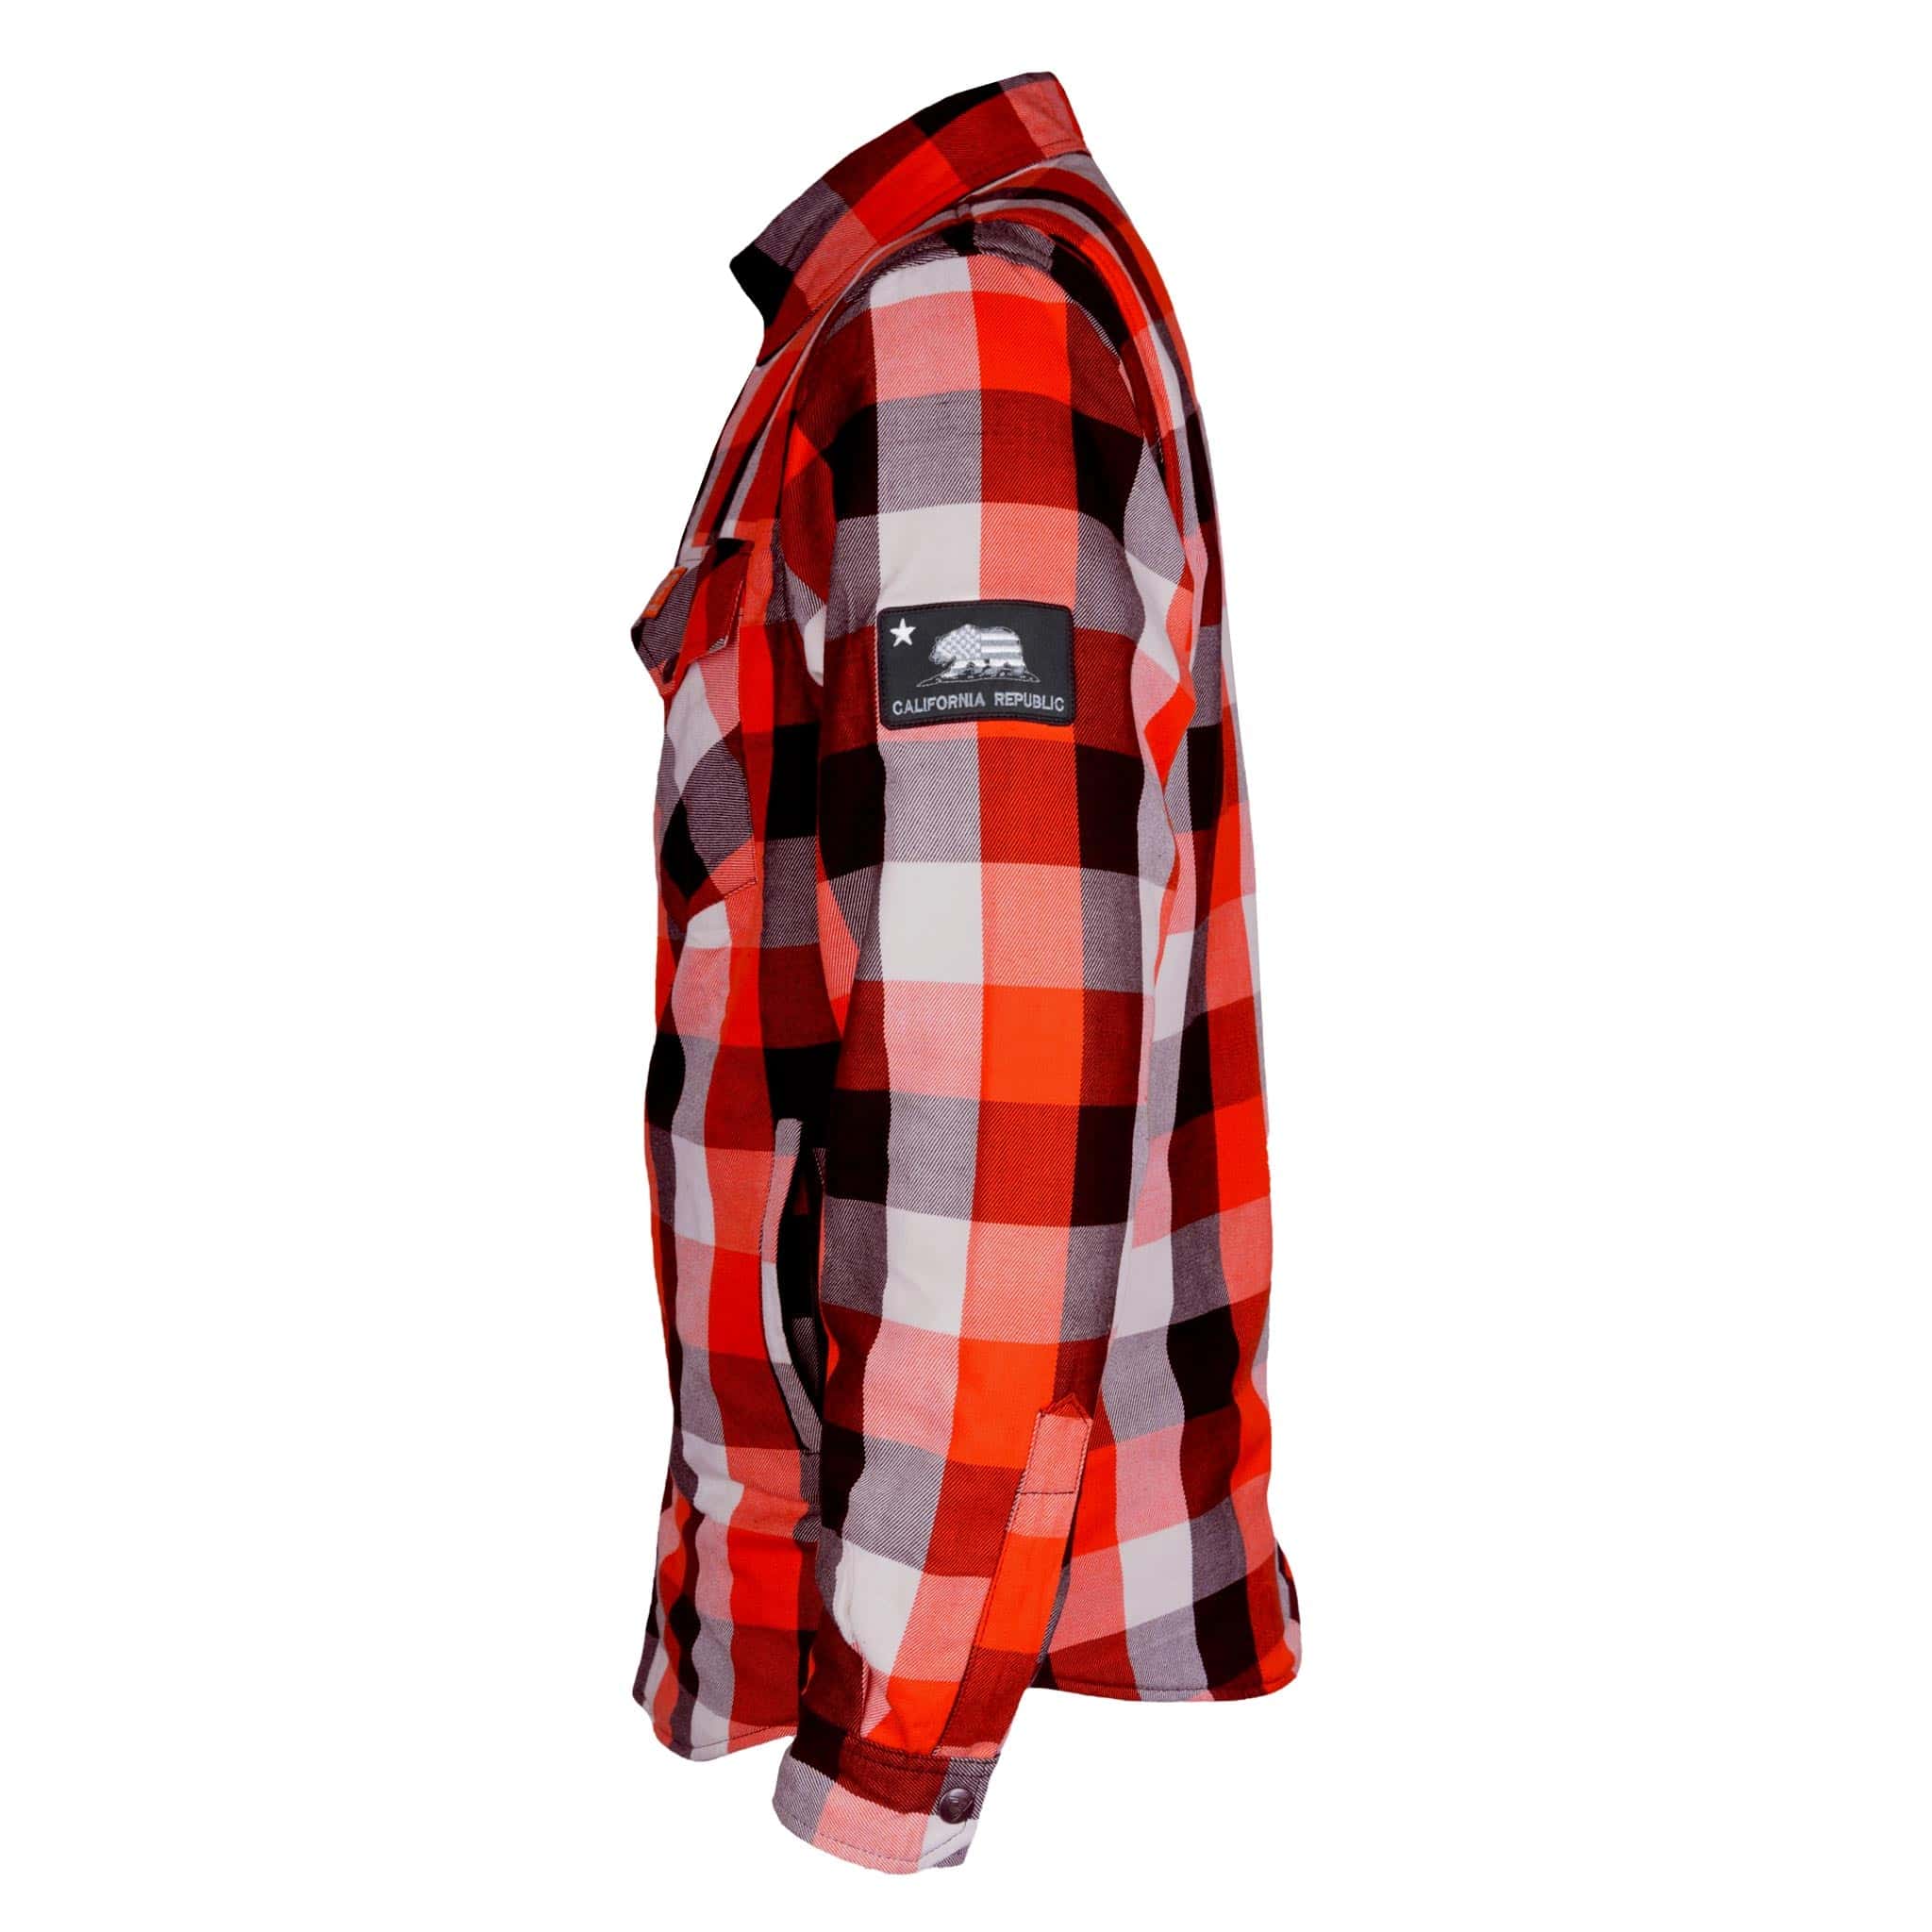 Protective Flannel Shirt "American Dream"  - Red, Black, White Checkered